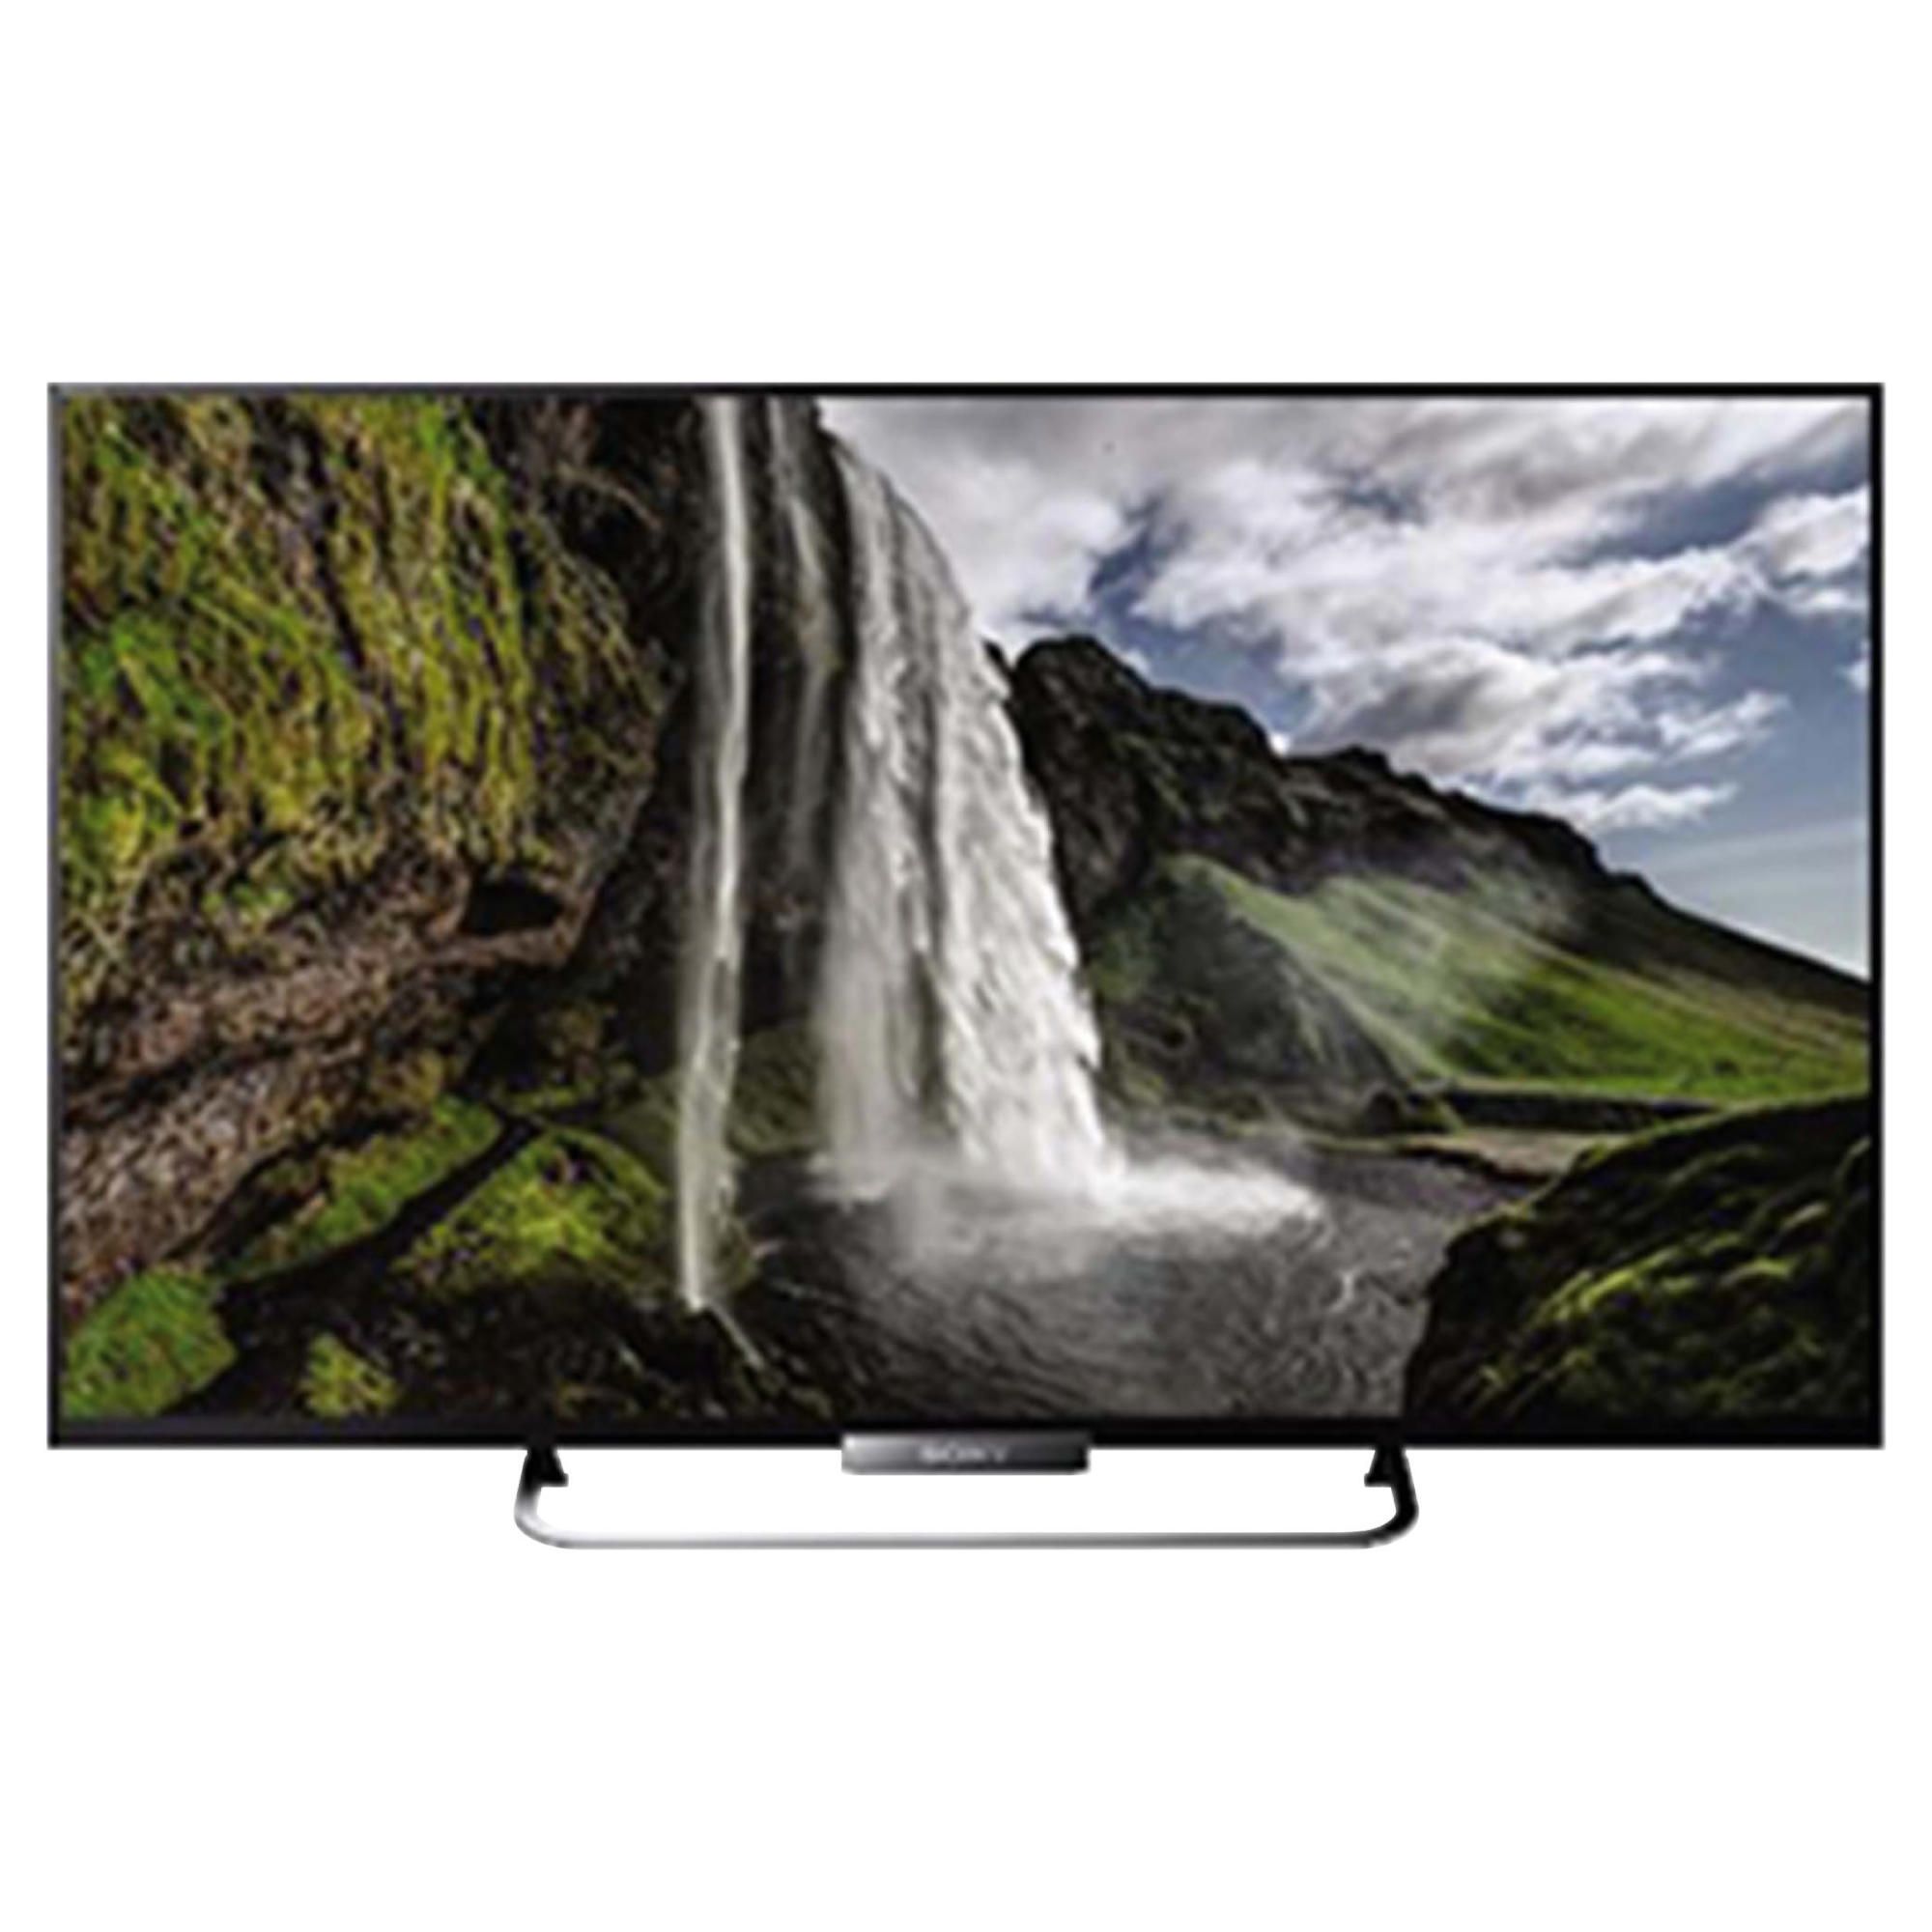 Sony KDL42W653ABU 42 Inch Full HD 1080P LED TV with Freeview HD